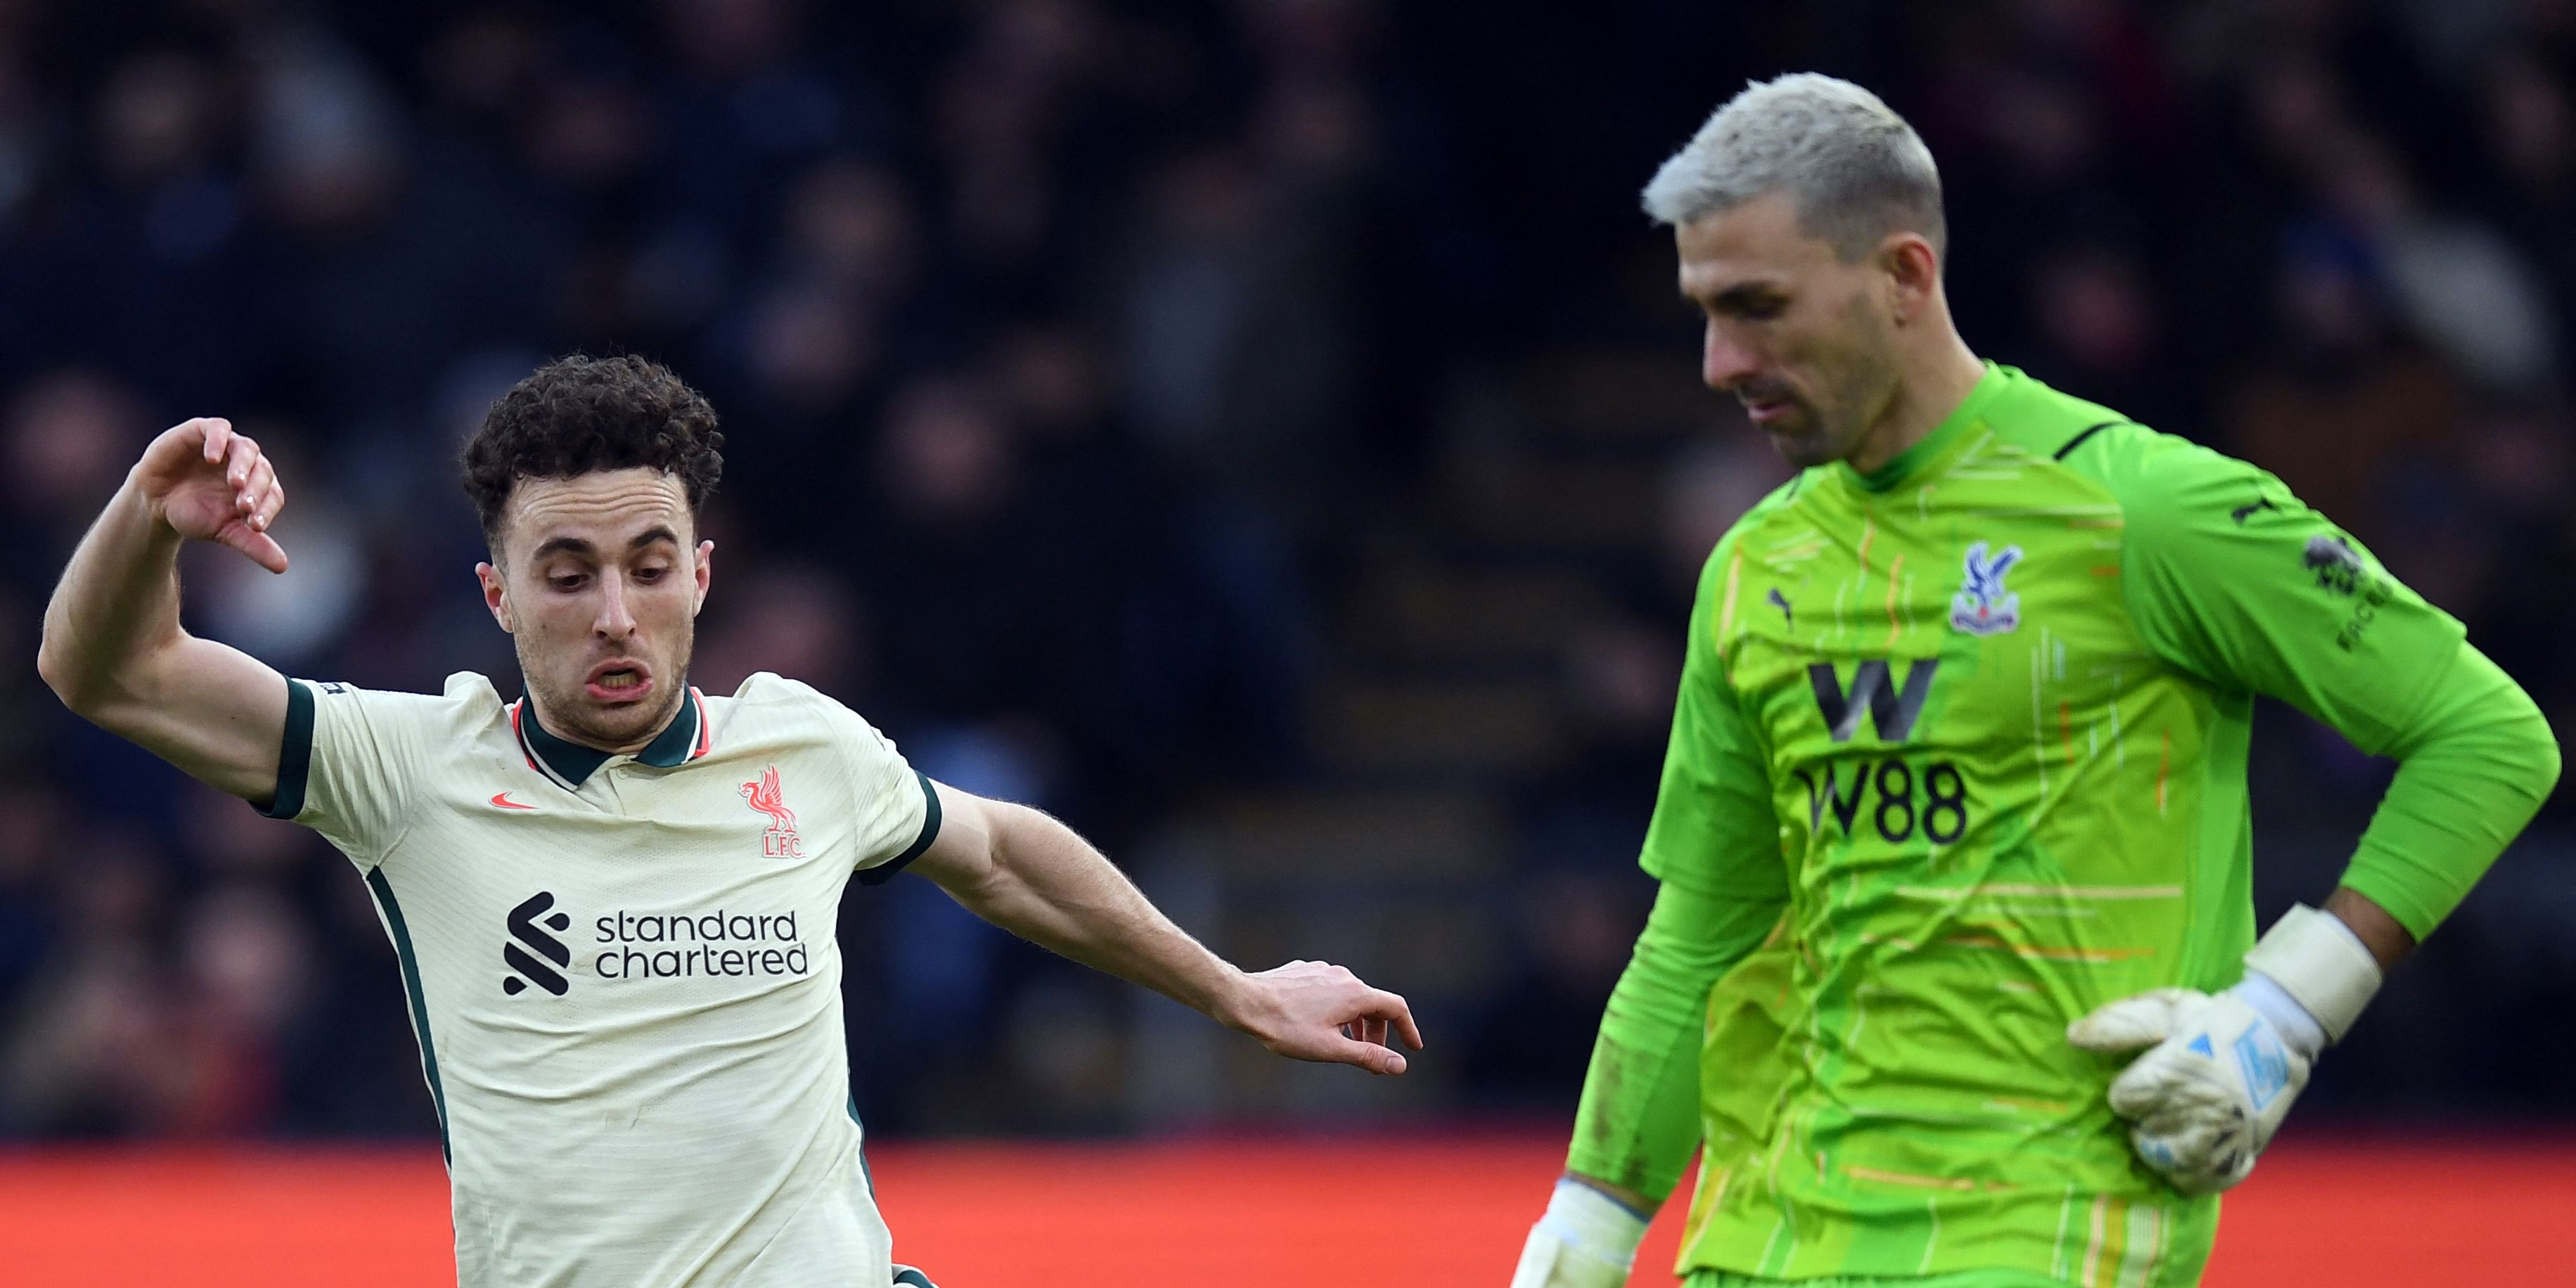 Gary Lineker issues verdict on Liverpool’s highly controversial penalty award in Palace win after VAR intervention